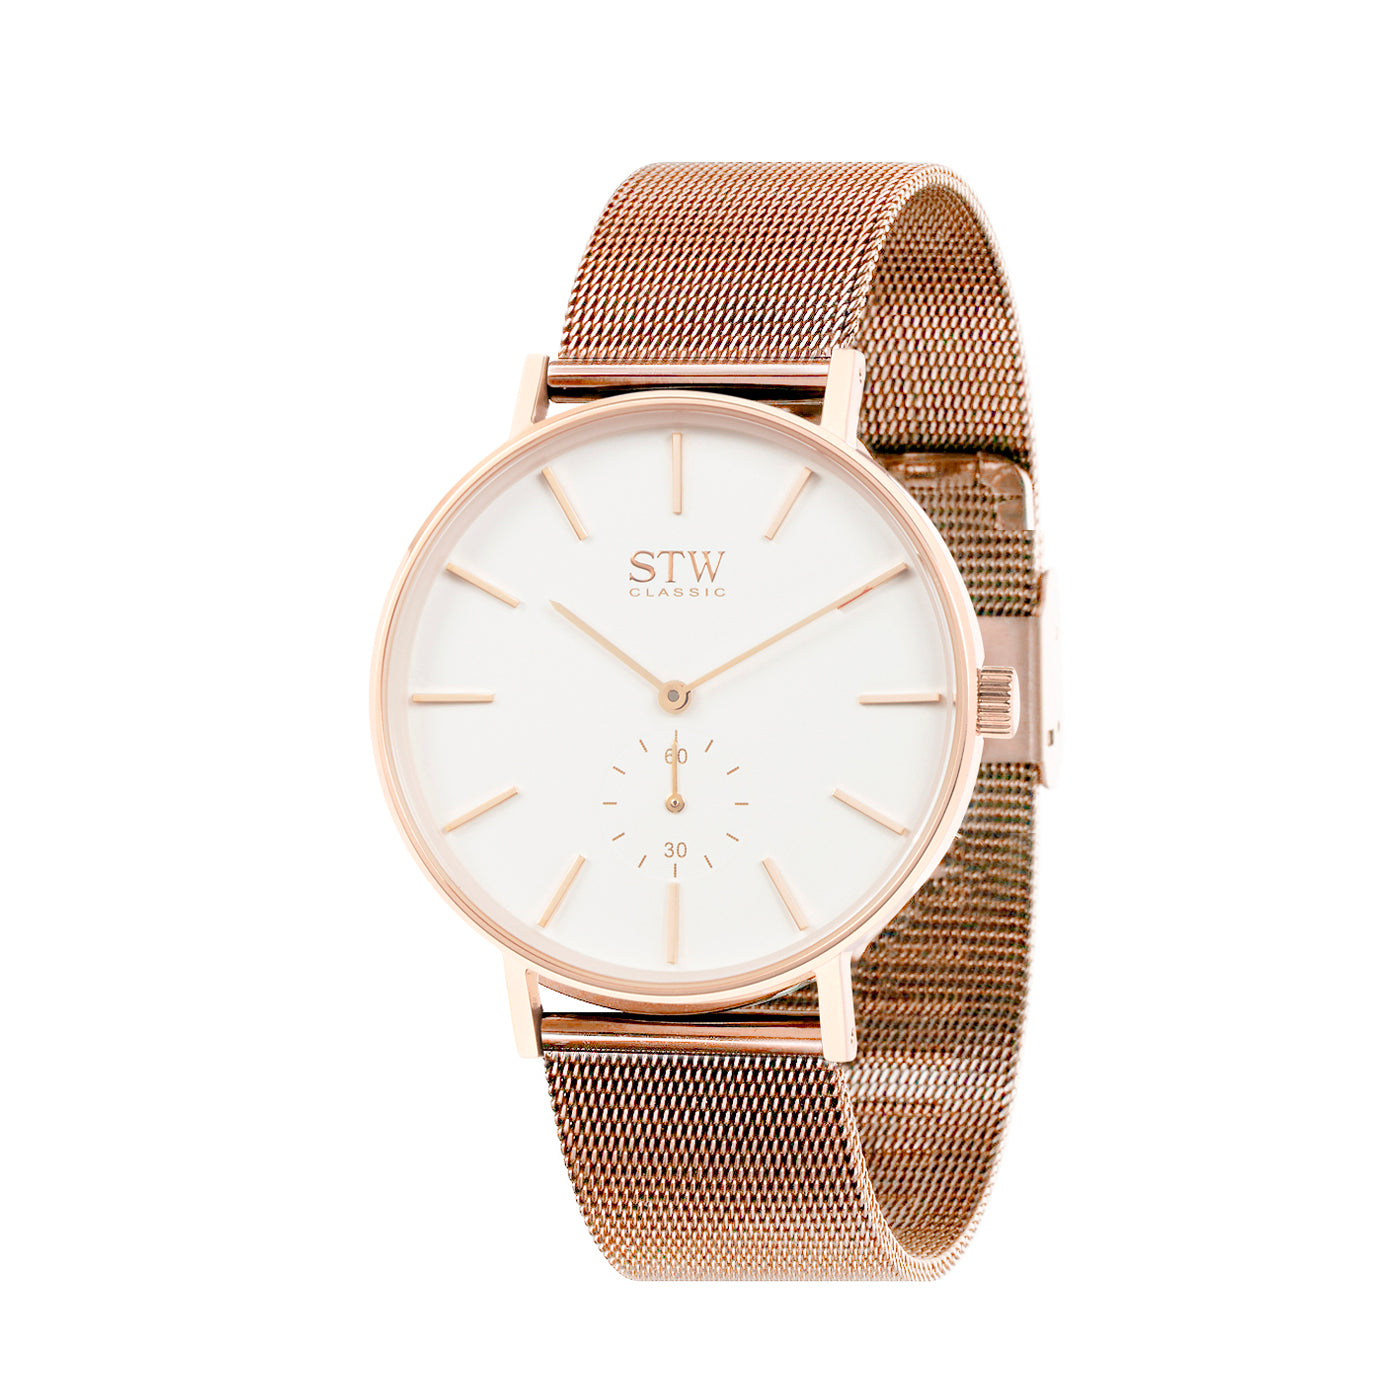 THE CLASSIC -  WHITE DIAL / ROSE GOLD MESH BAND WATCH